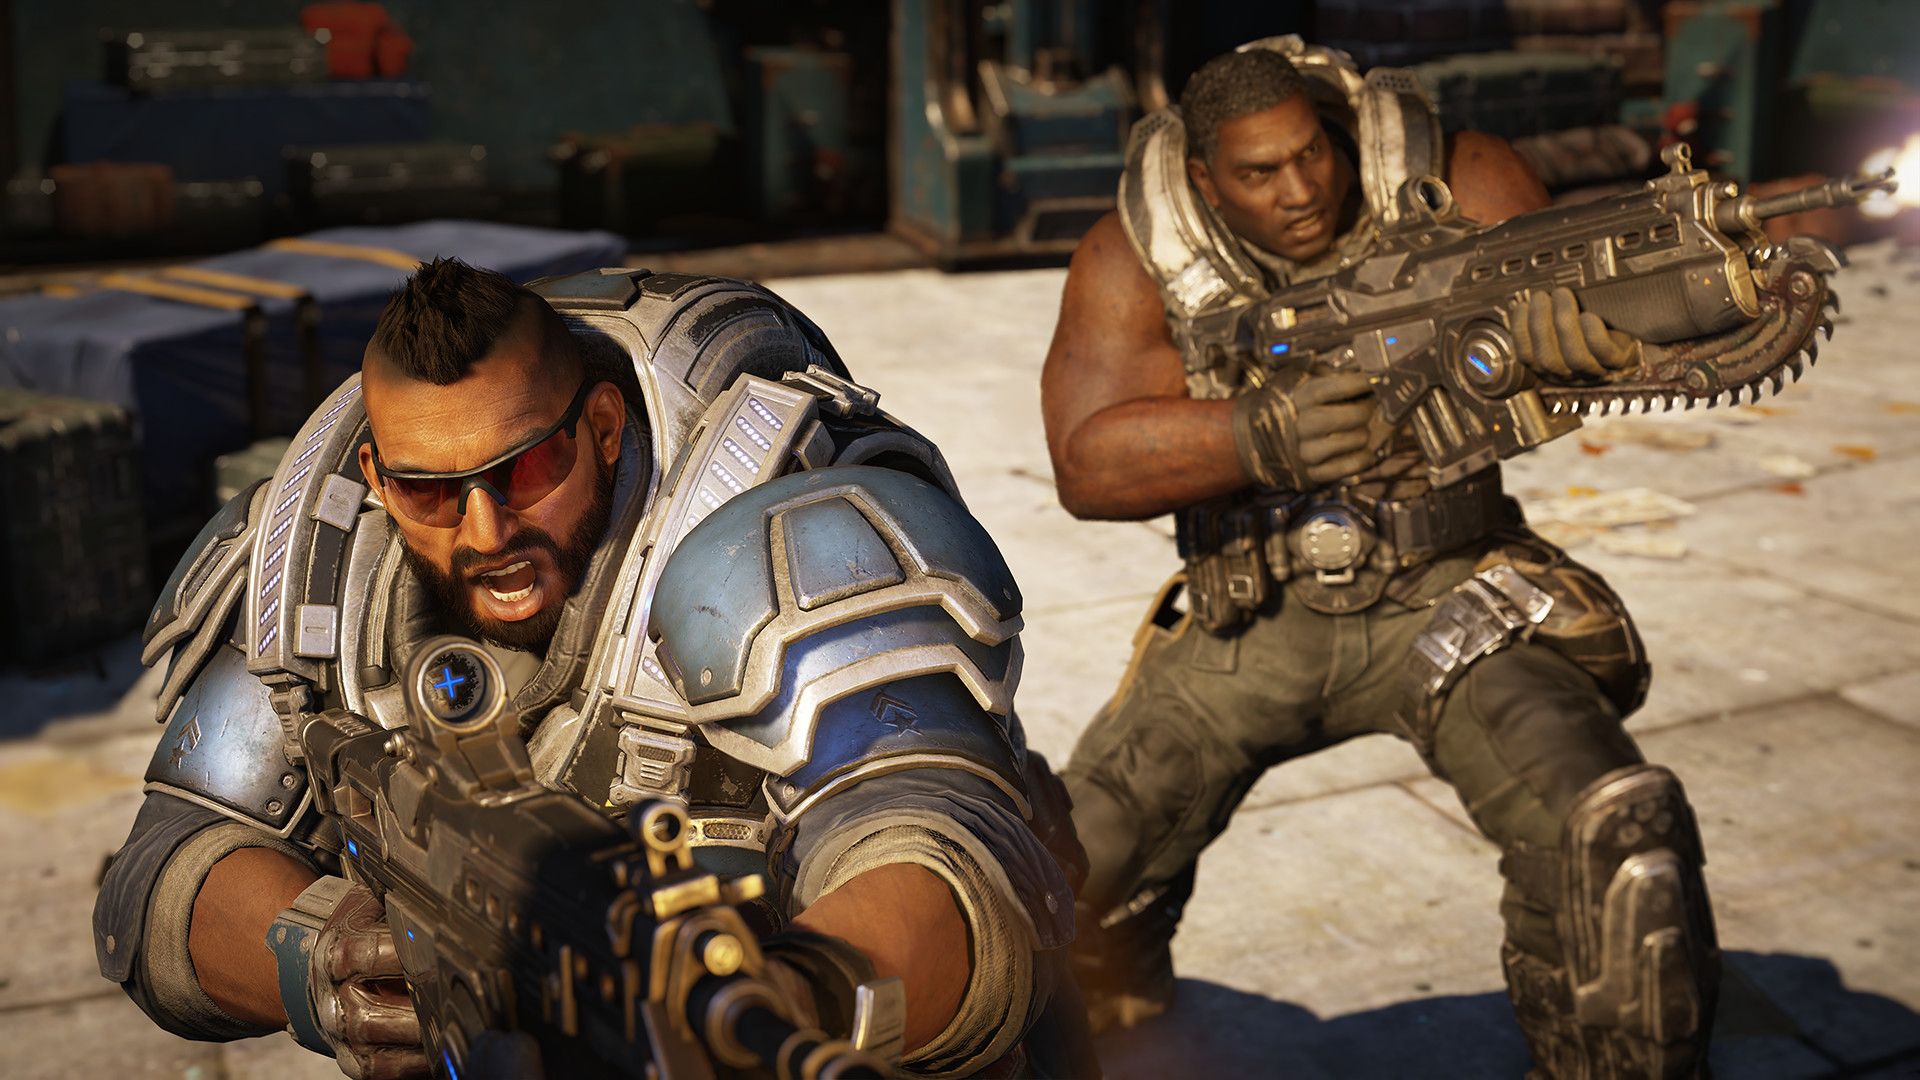 10 Games To Play If You Love Gears 5